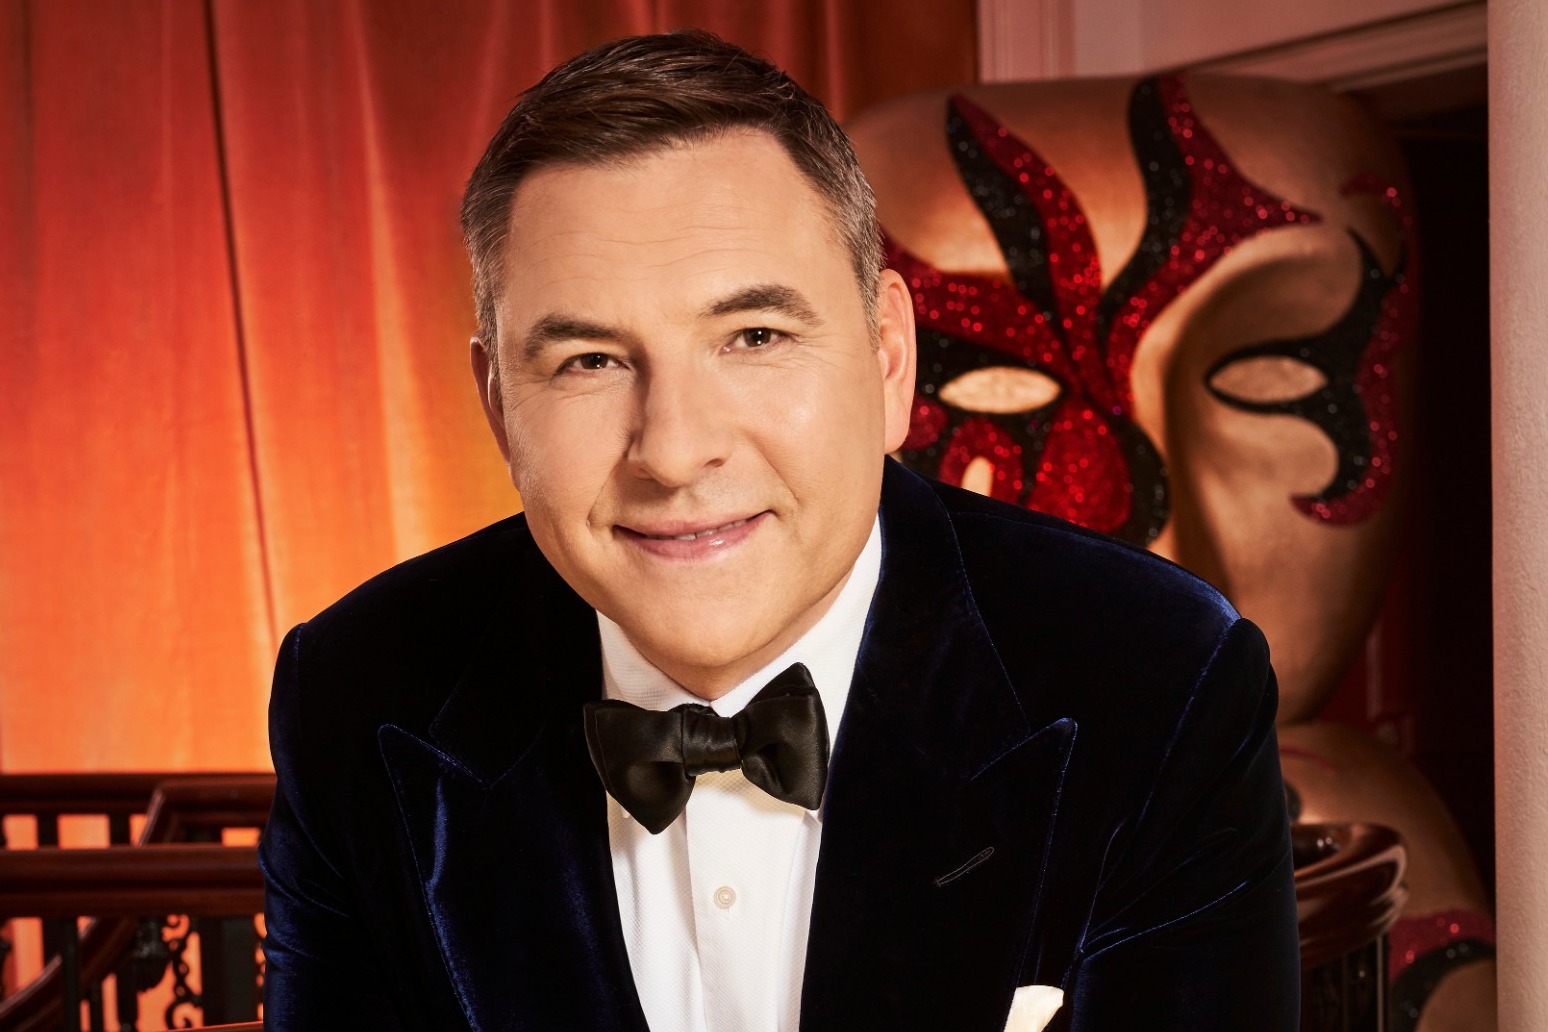 David Walliams and Martin Clunes among stars to settle phone hacking claims 